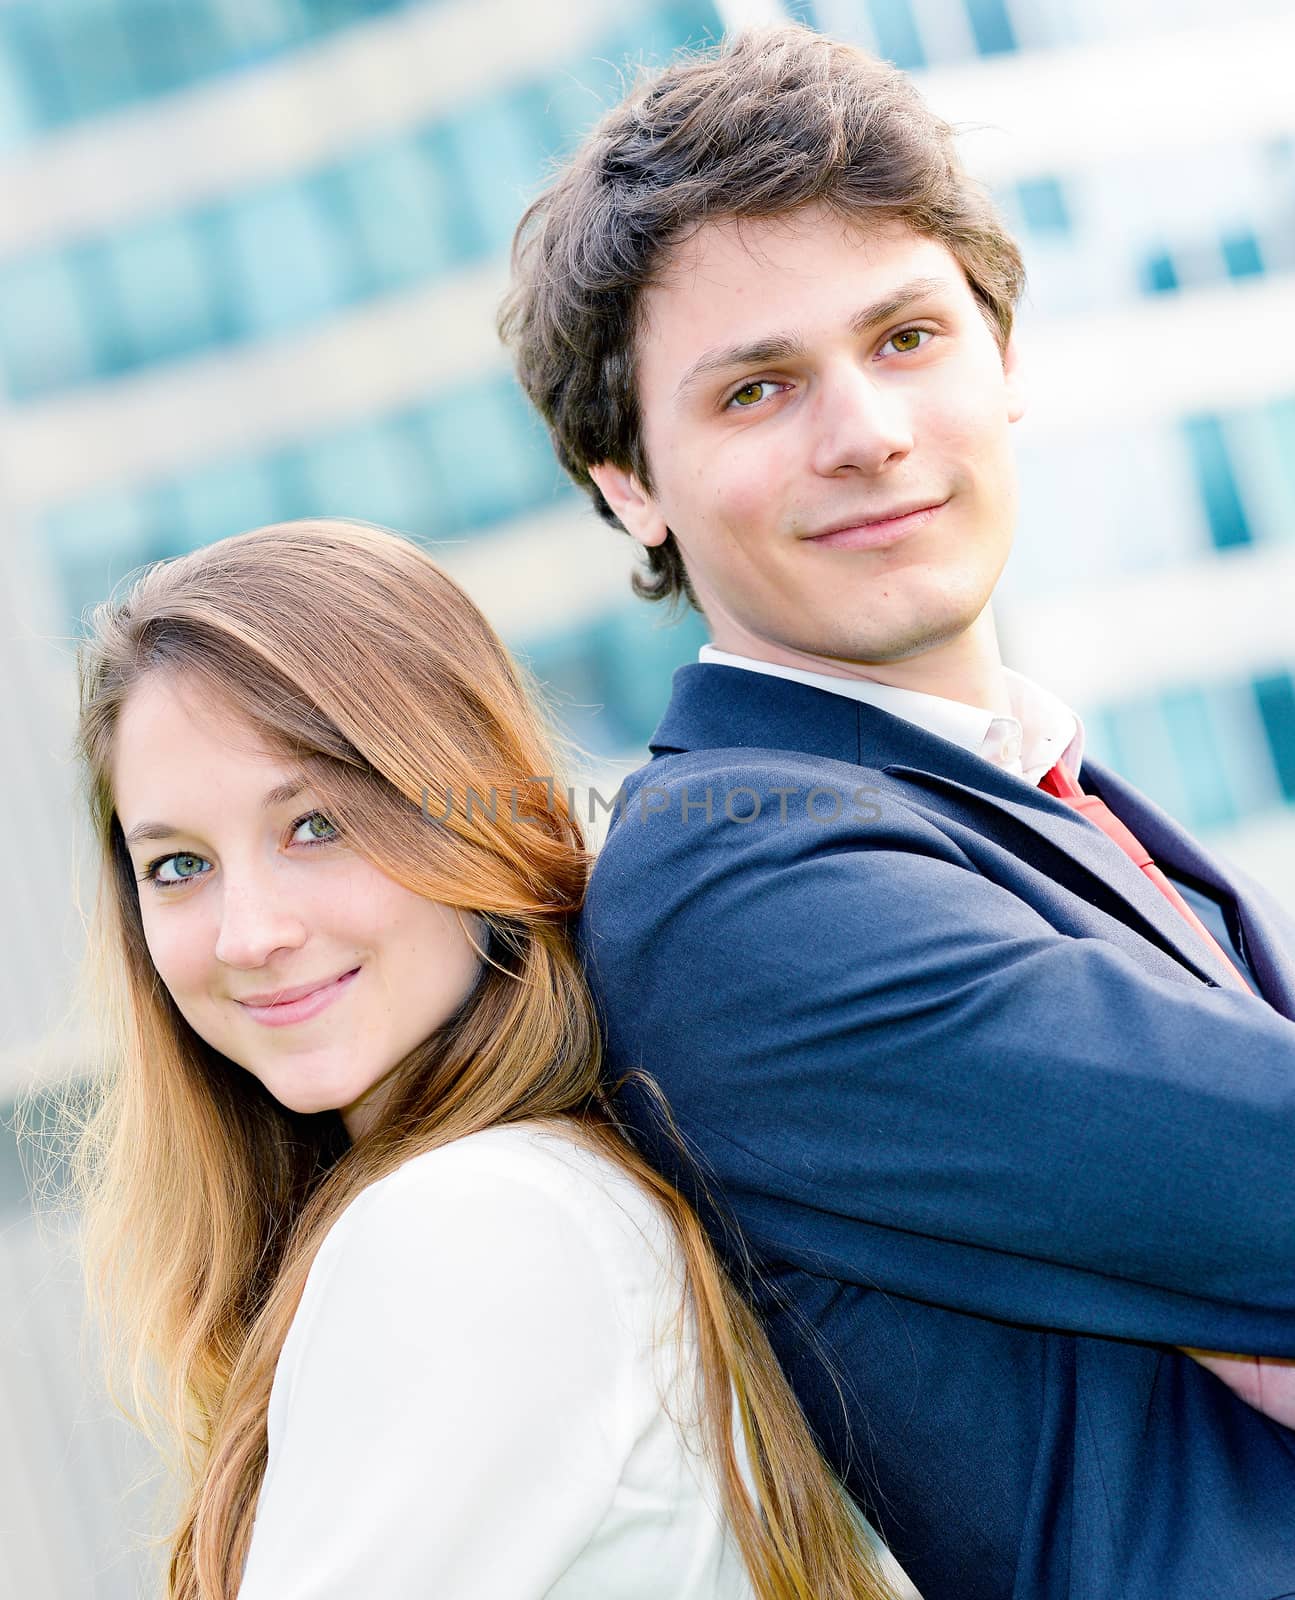 expressive portrait Junior executives of company crossed arms by pixinoo